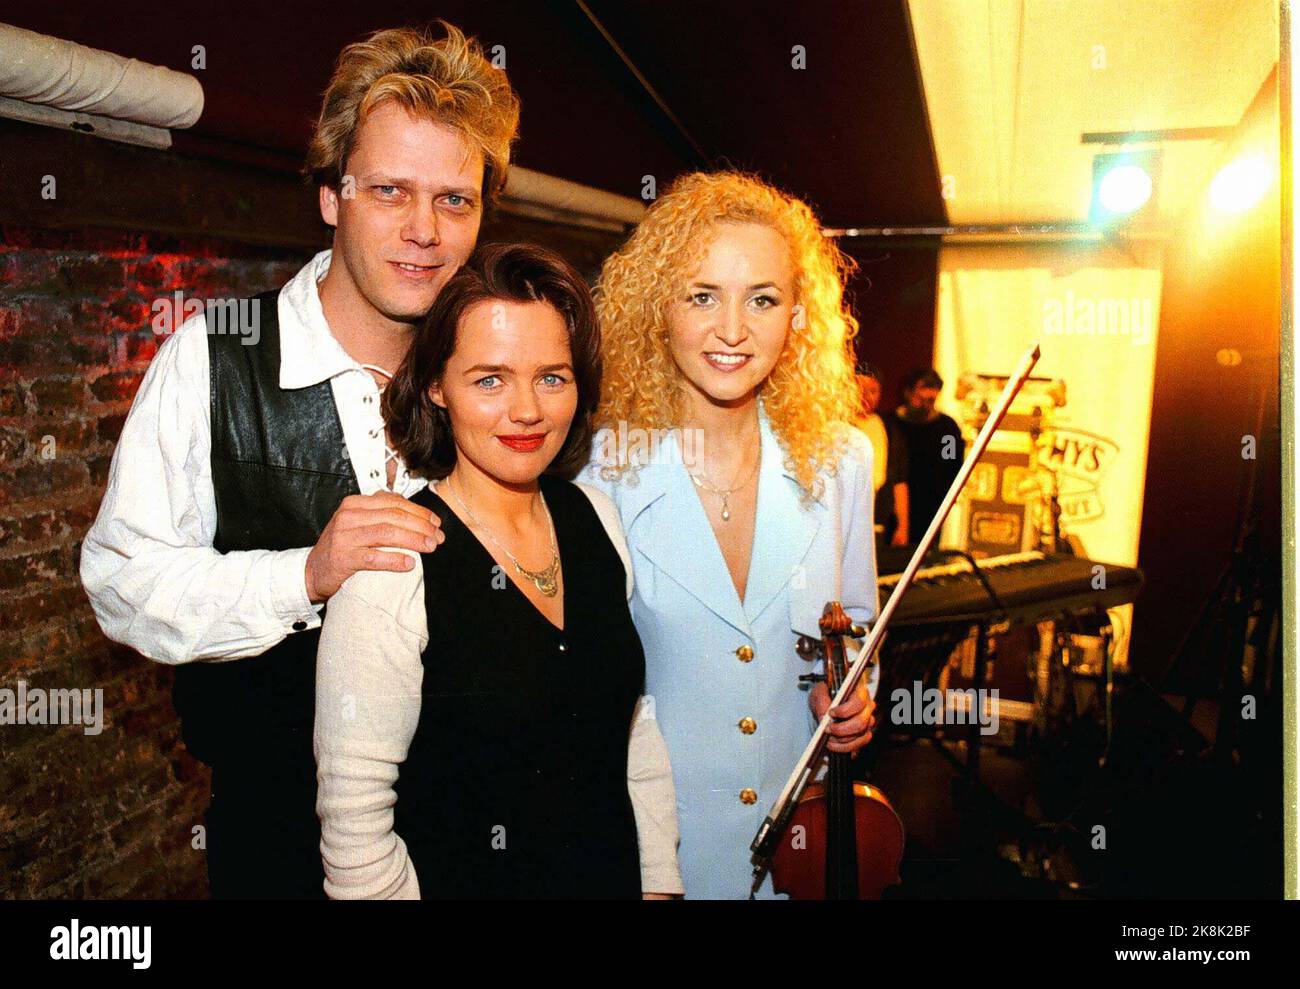 Dublin. Melody Grand Prix 1995. The Norwegian group 'Secret Garden' to perform 'Nocturne' during the final of the International Melody Grand Prix 1995. From v. Rolf Løvland, Gunnhild Tvinnereim and Fionnuala Sherry. NTB photo: Per Løchen Stock Photo